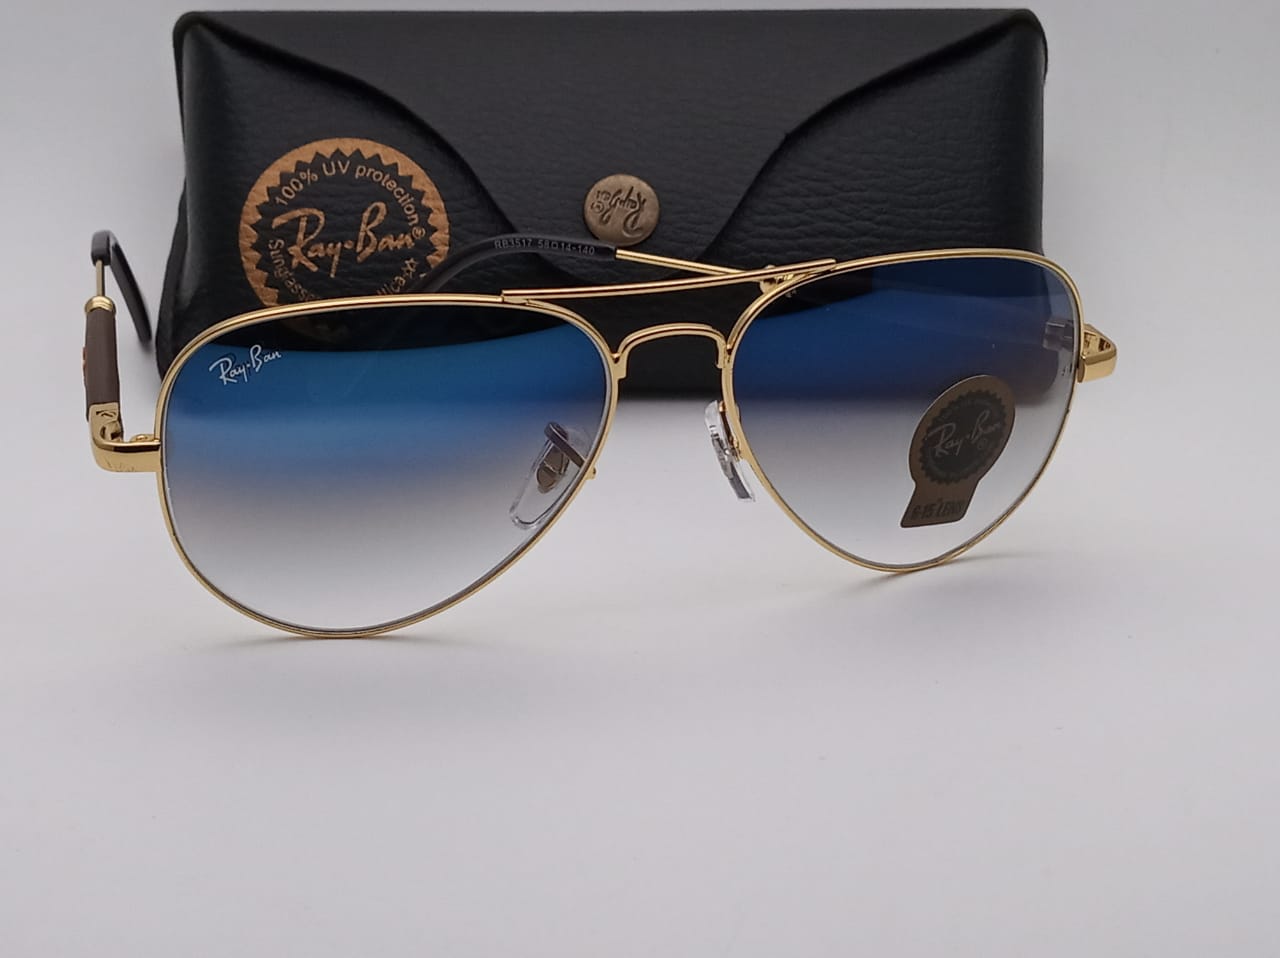 Blue Shade & Gold 3517 Oval Trendy Hot Favourite Wintage Sunglass For Unisex.